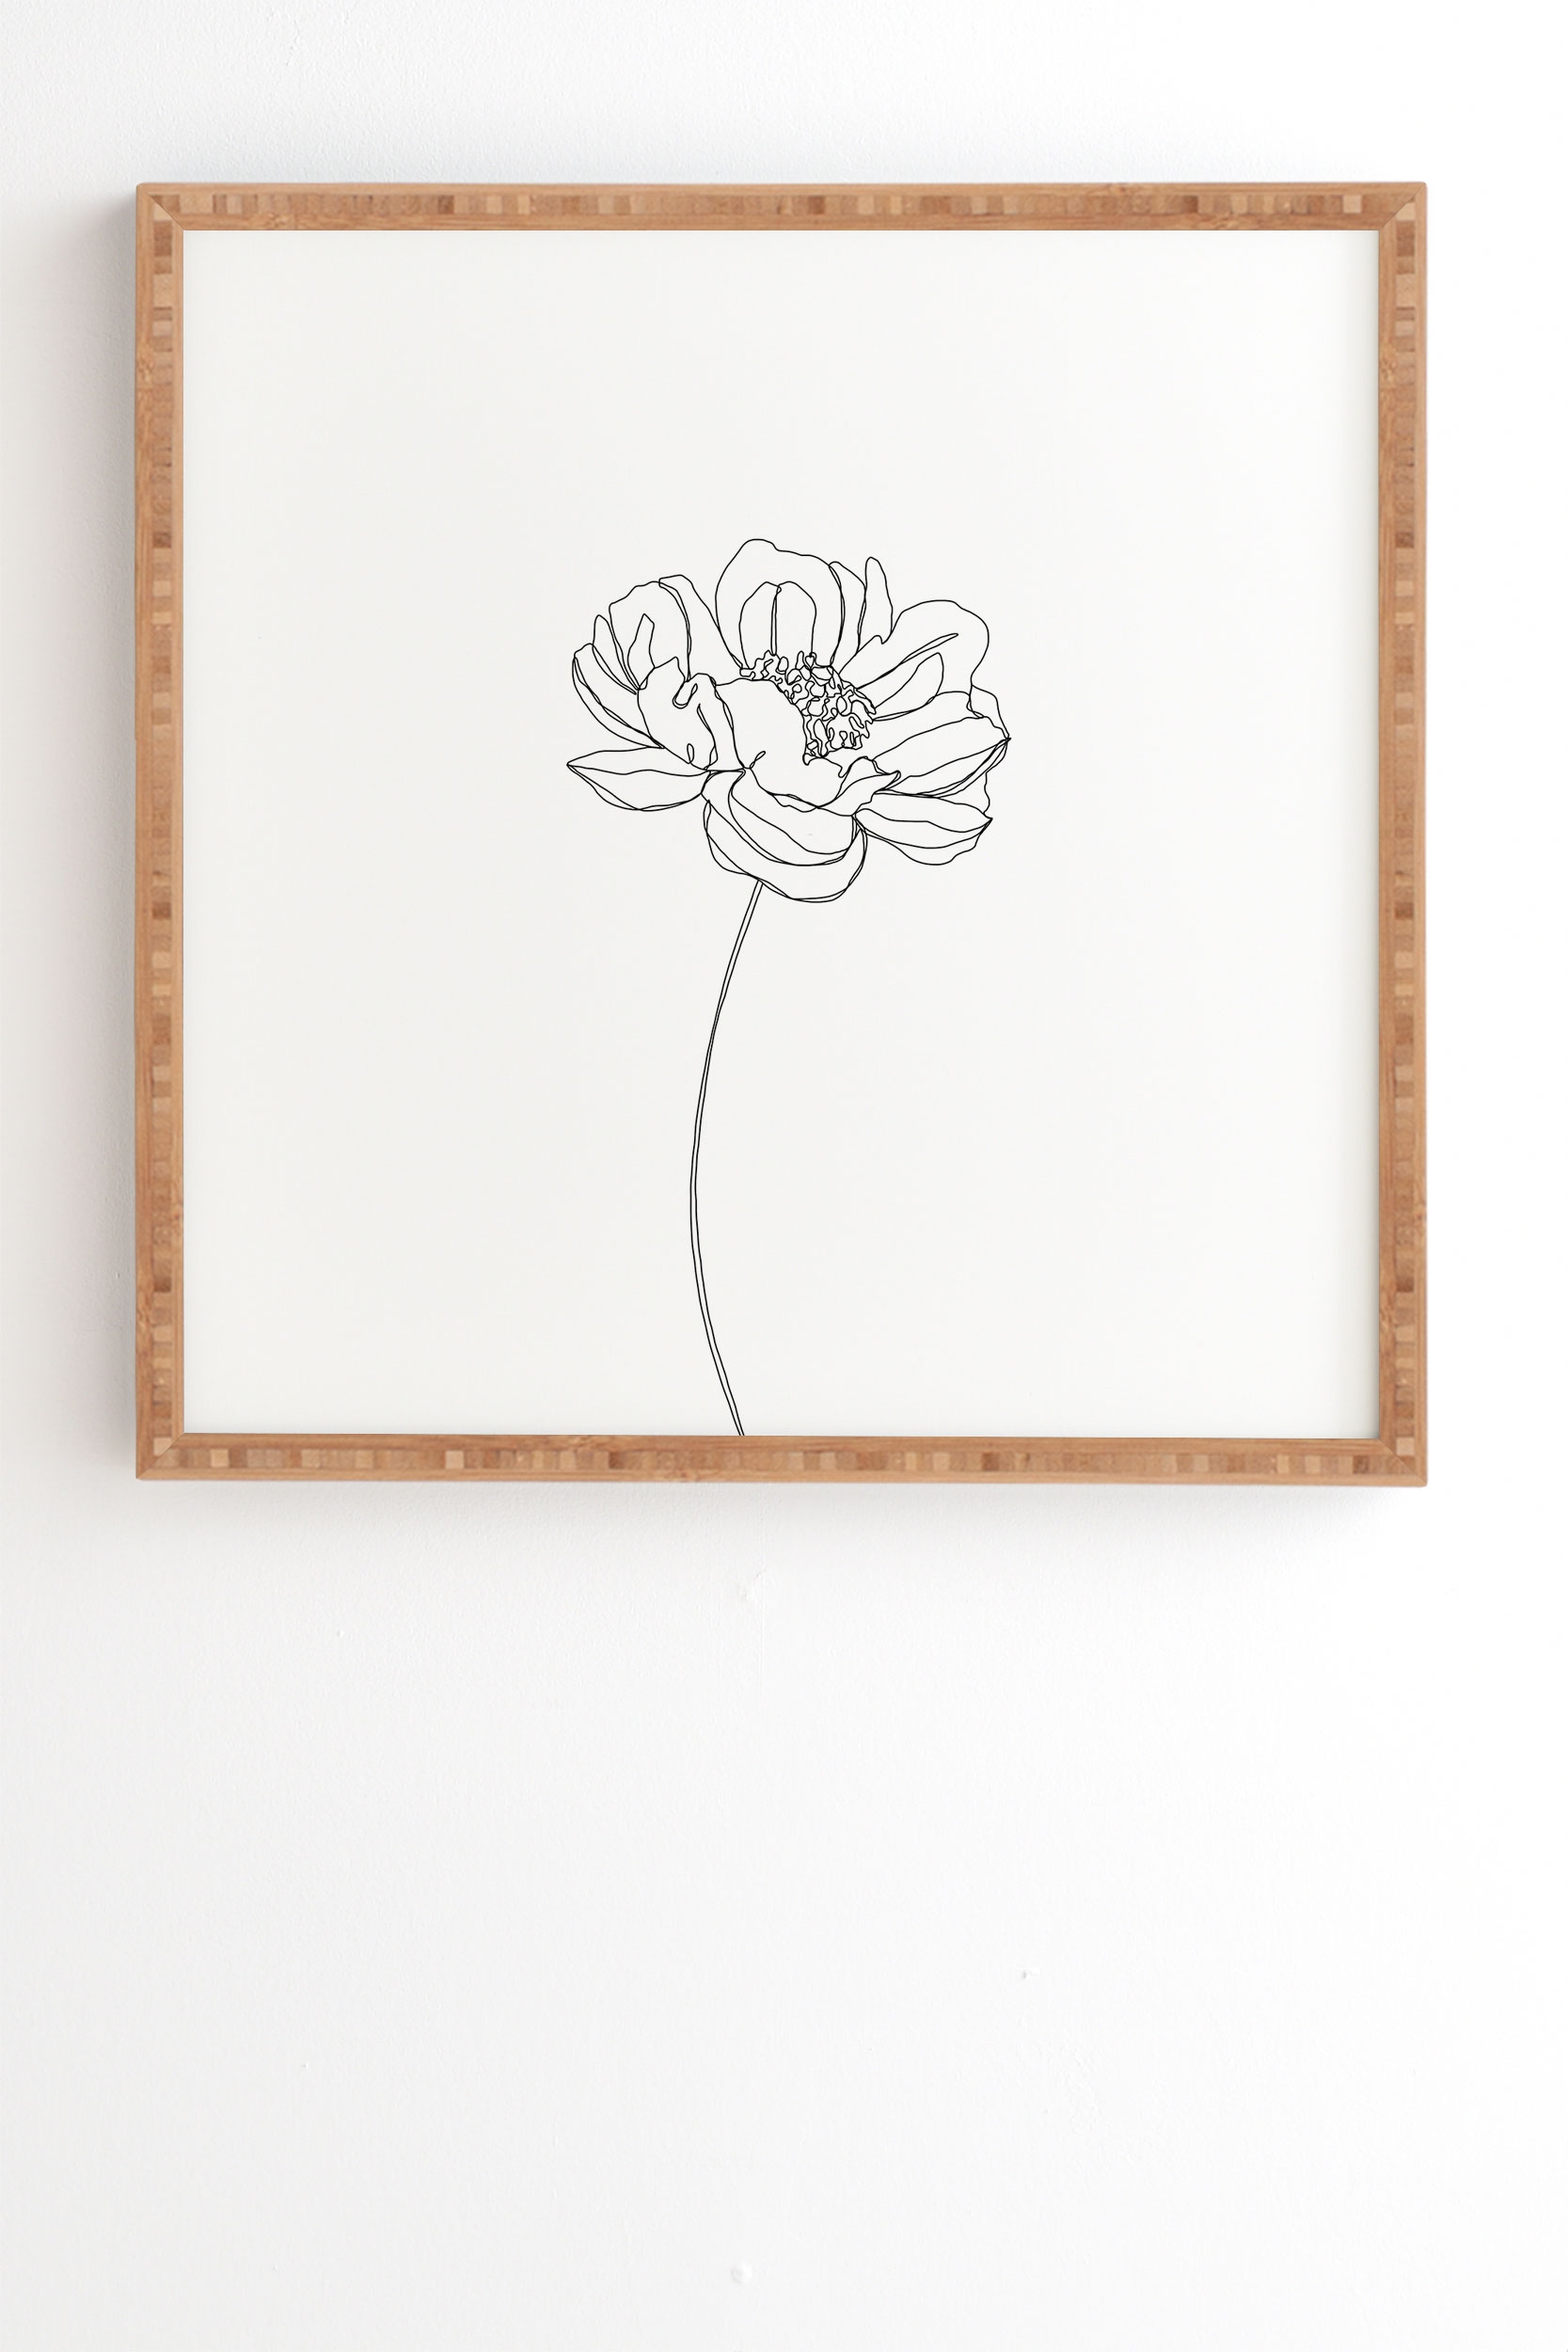 Single Flower Drawing Hazel by The Colour Study - Framed Wall Art Bamboo 20" x 20" - Image 1